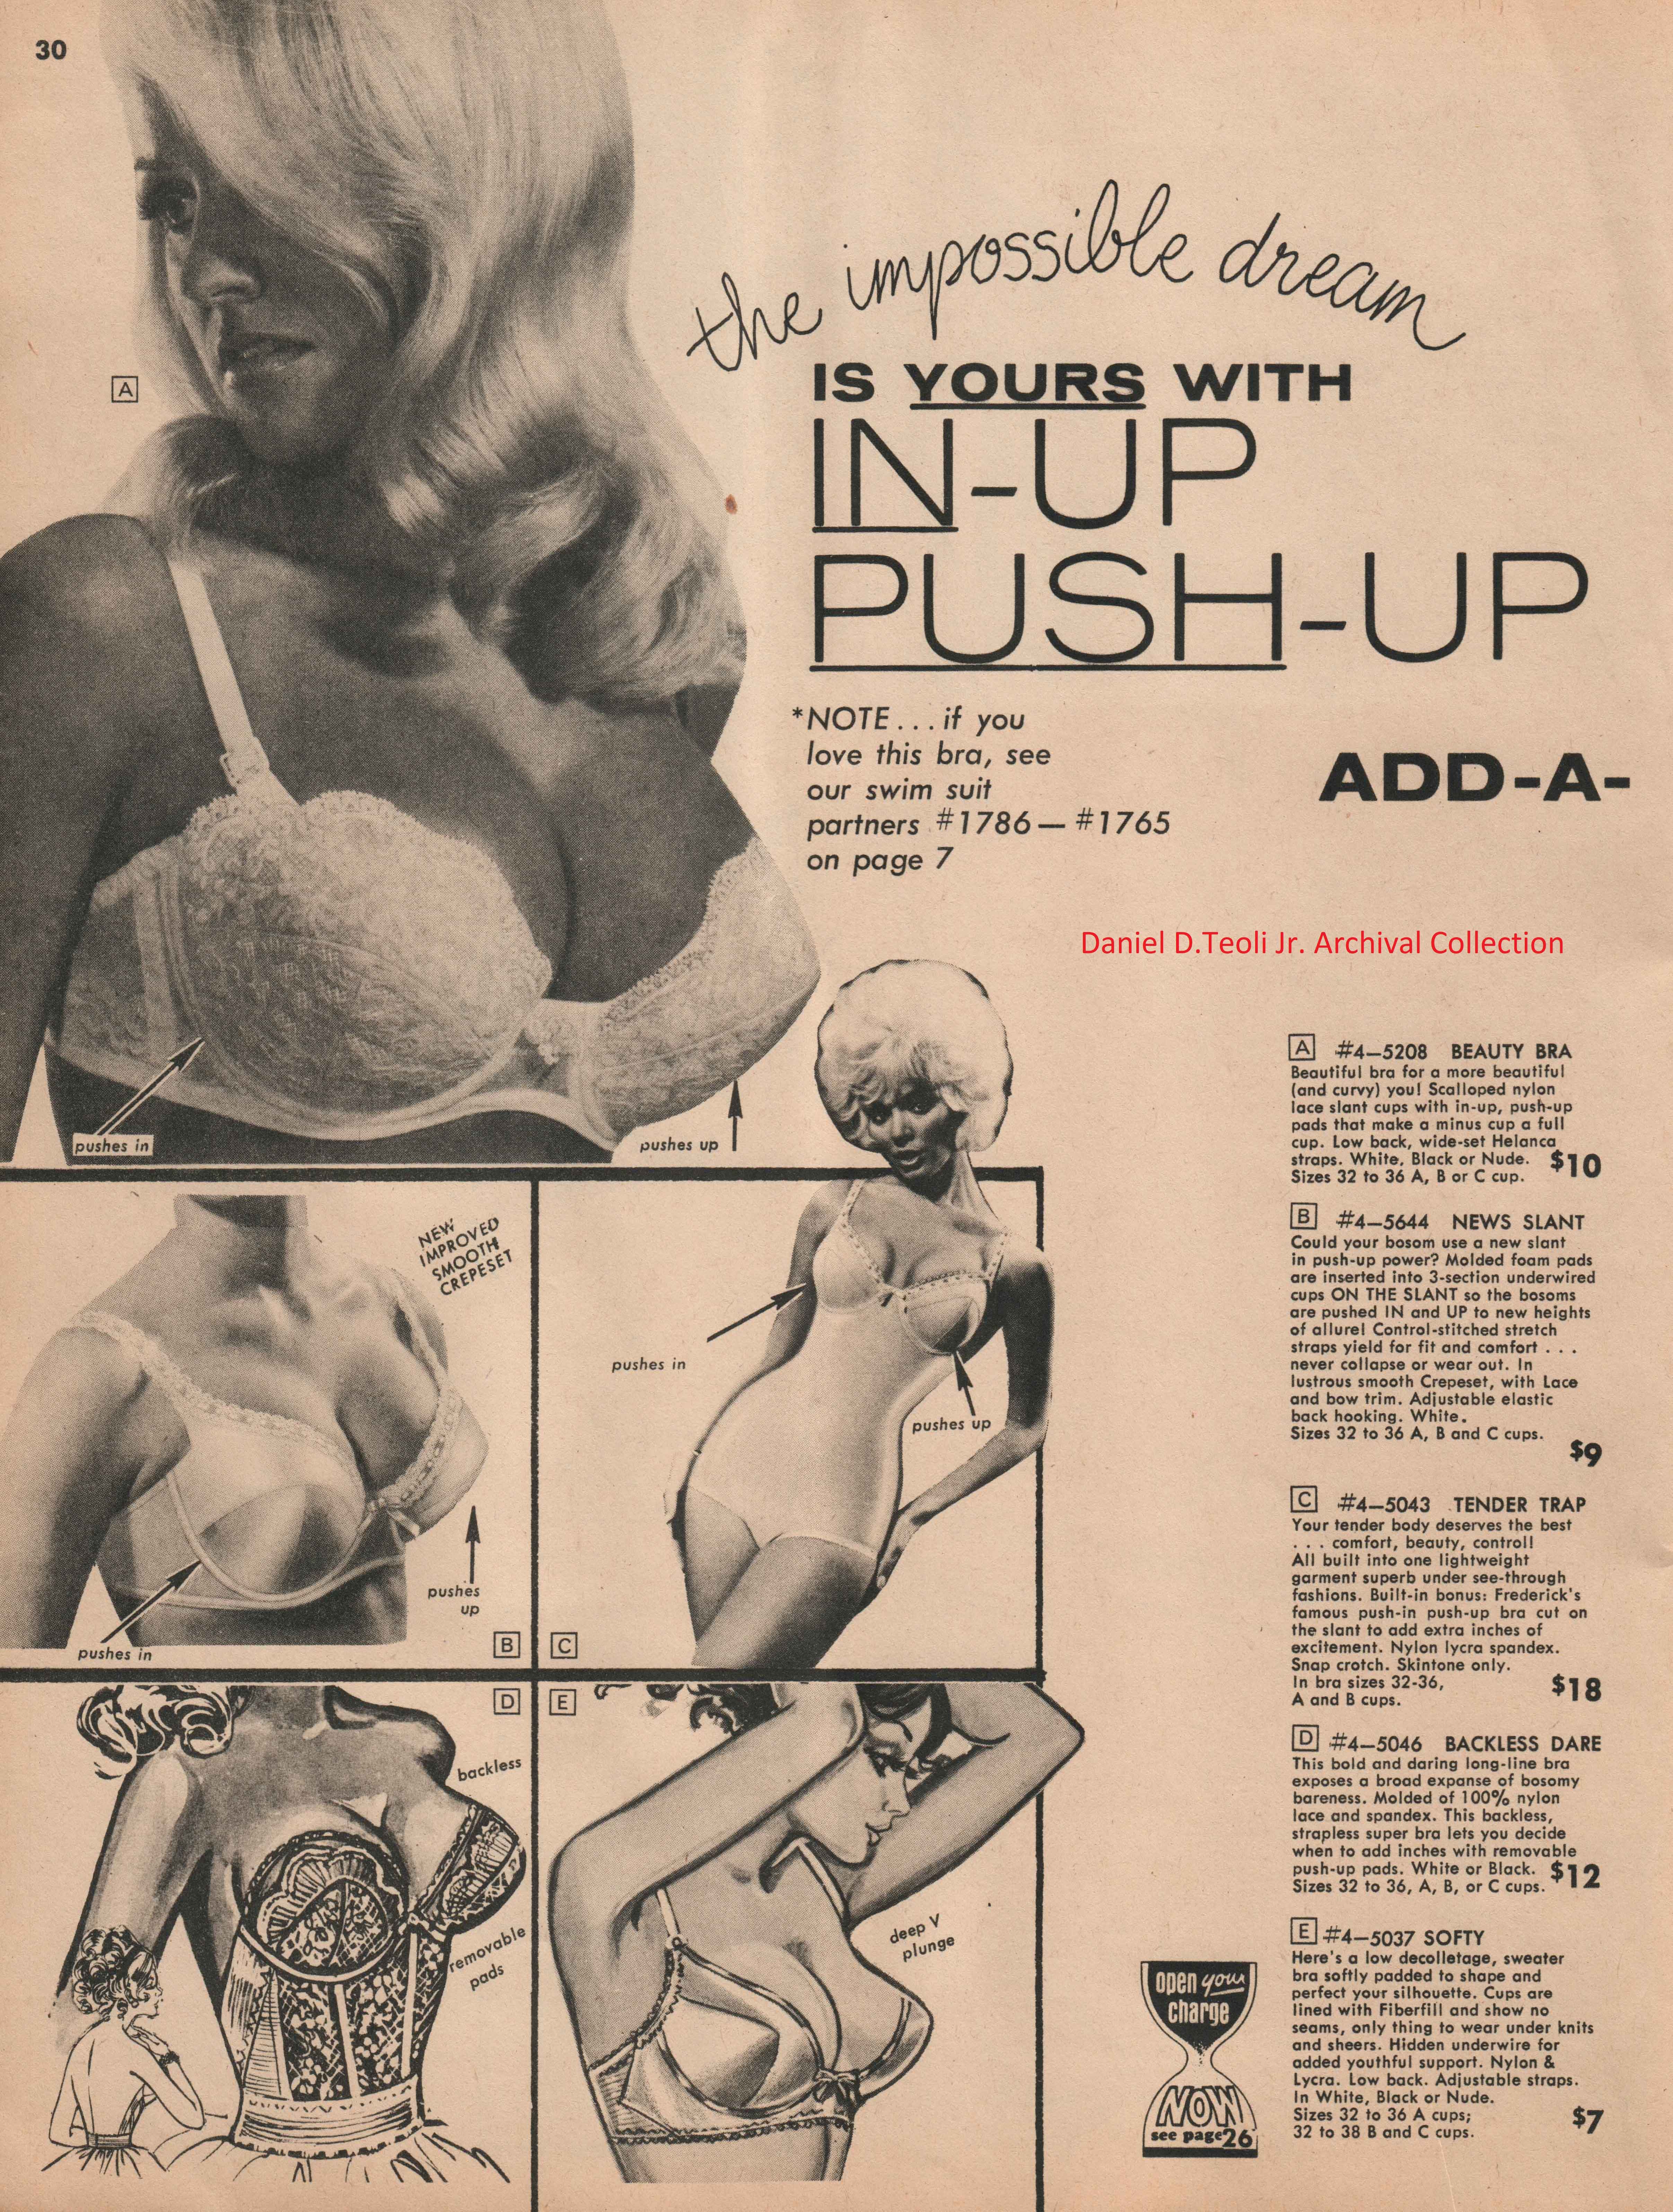 copyranter: Frederick's of Hollywood bras of yesteryear: blow up your t*ts.